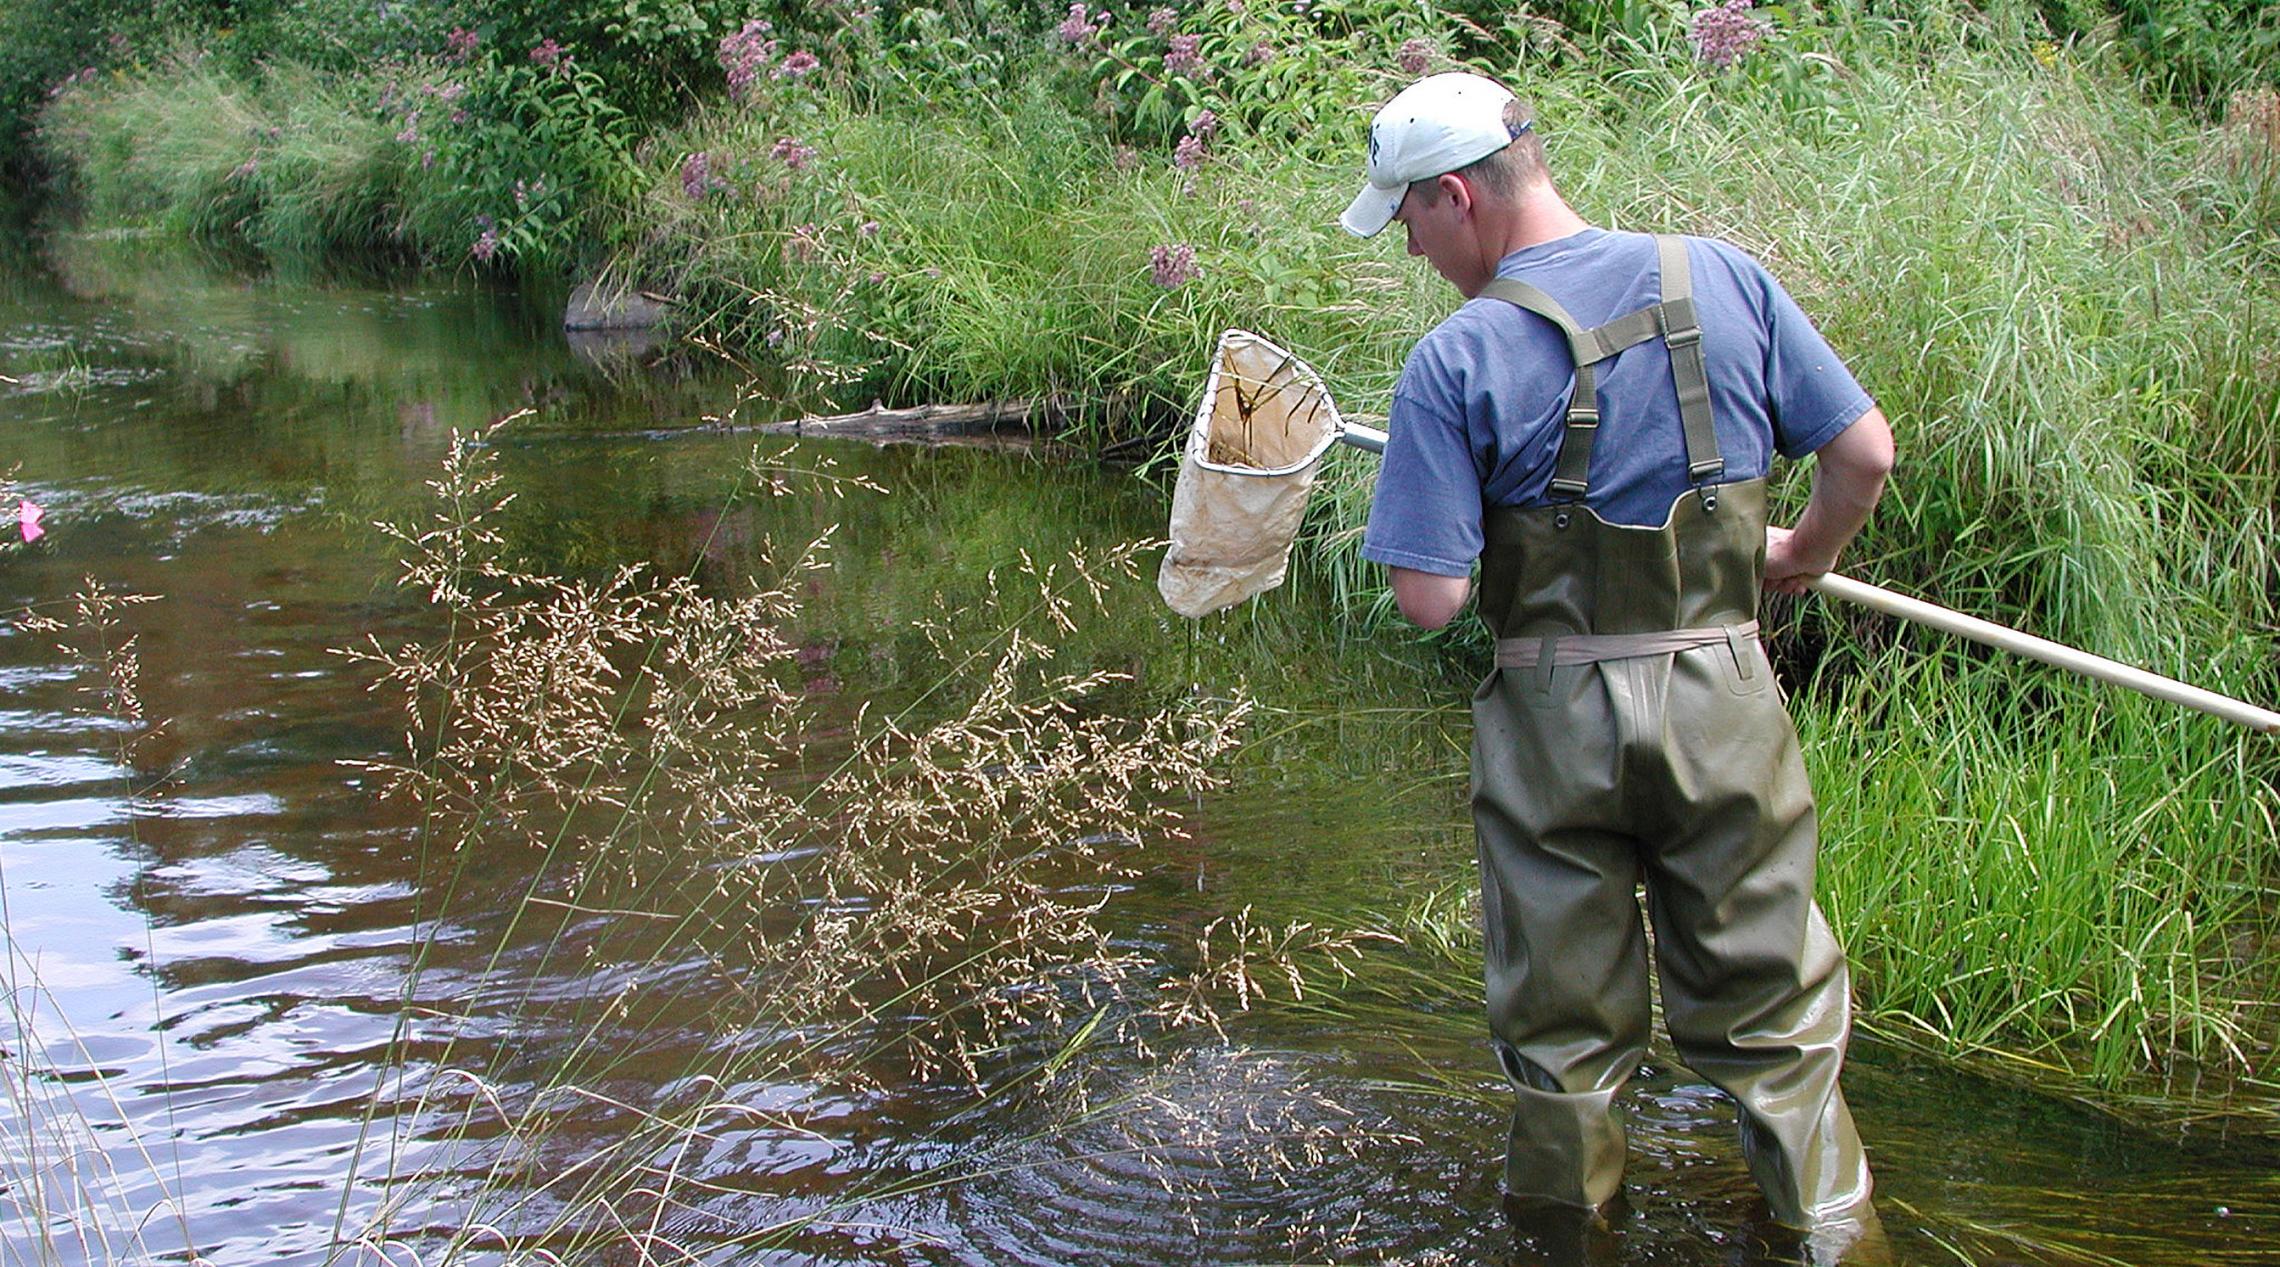 Man taking water sample from a stream